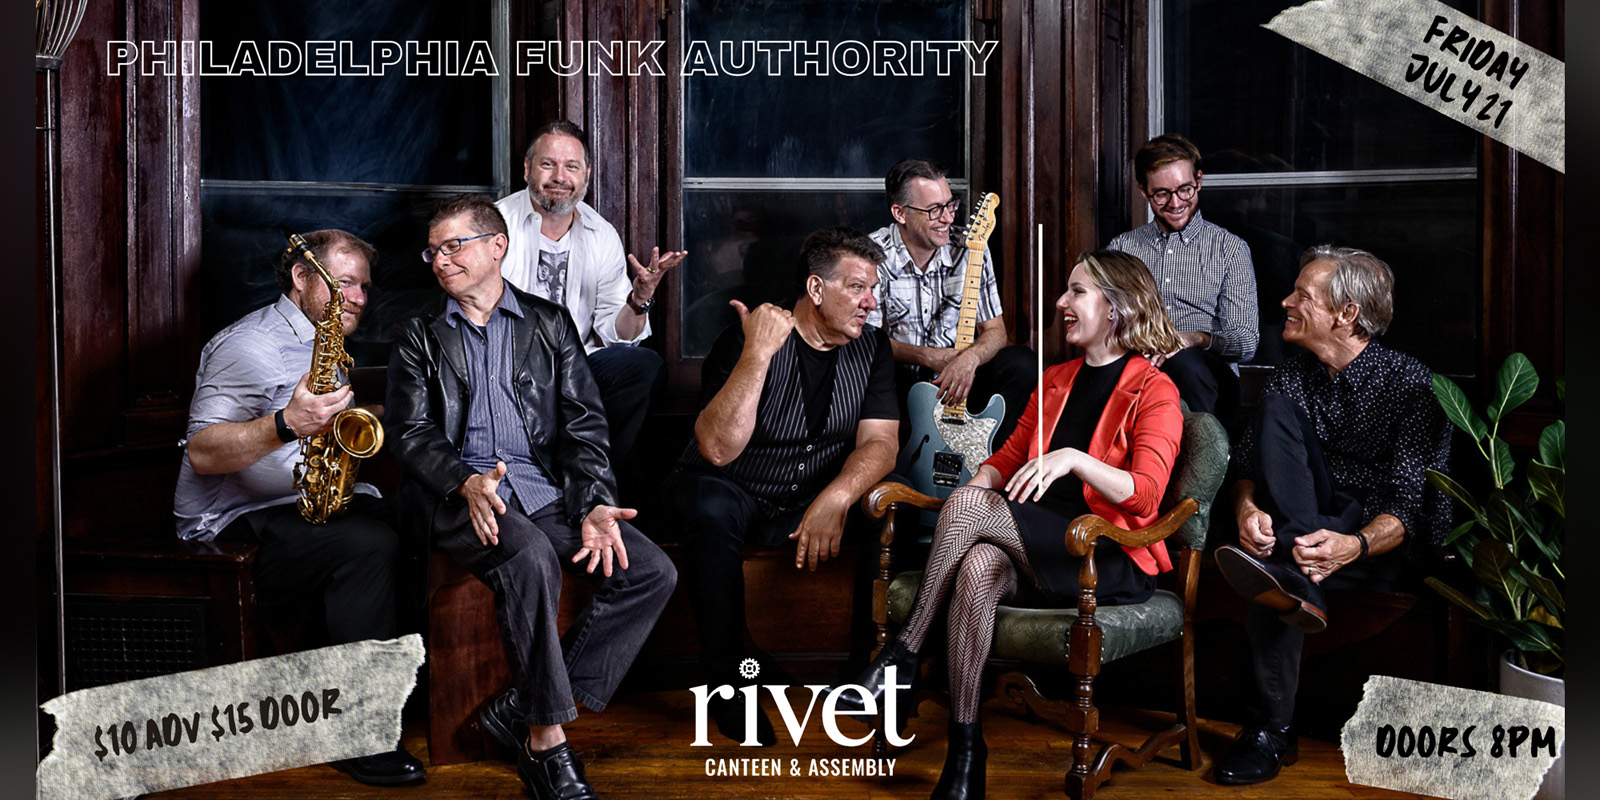 Philadelphia Funk Authority performing live at Rivet: Canteen & Assembly on Friday, July 21, 2023!